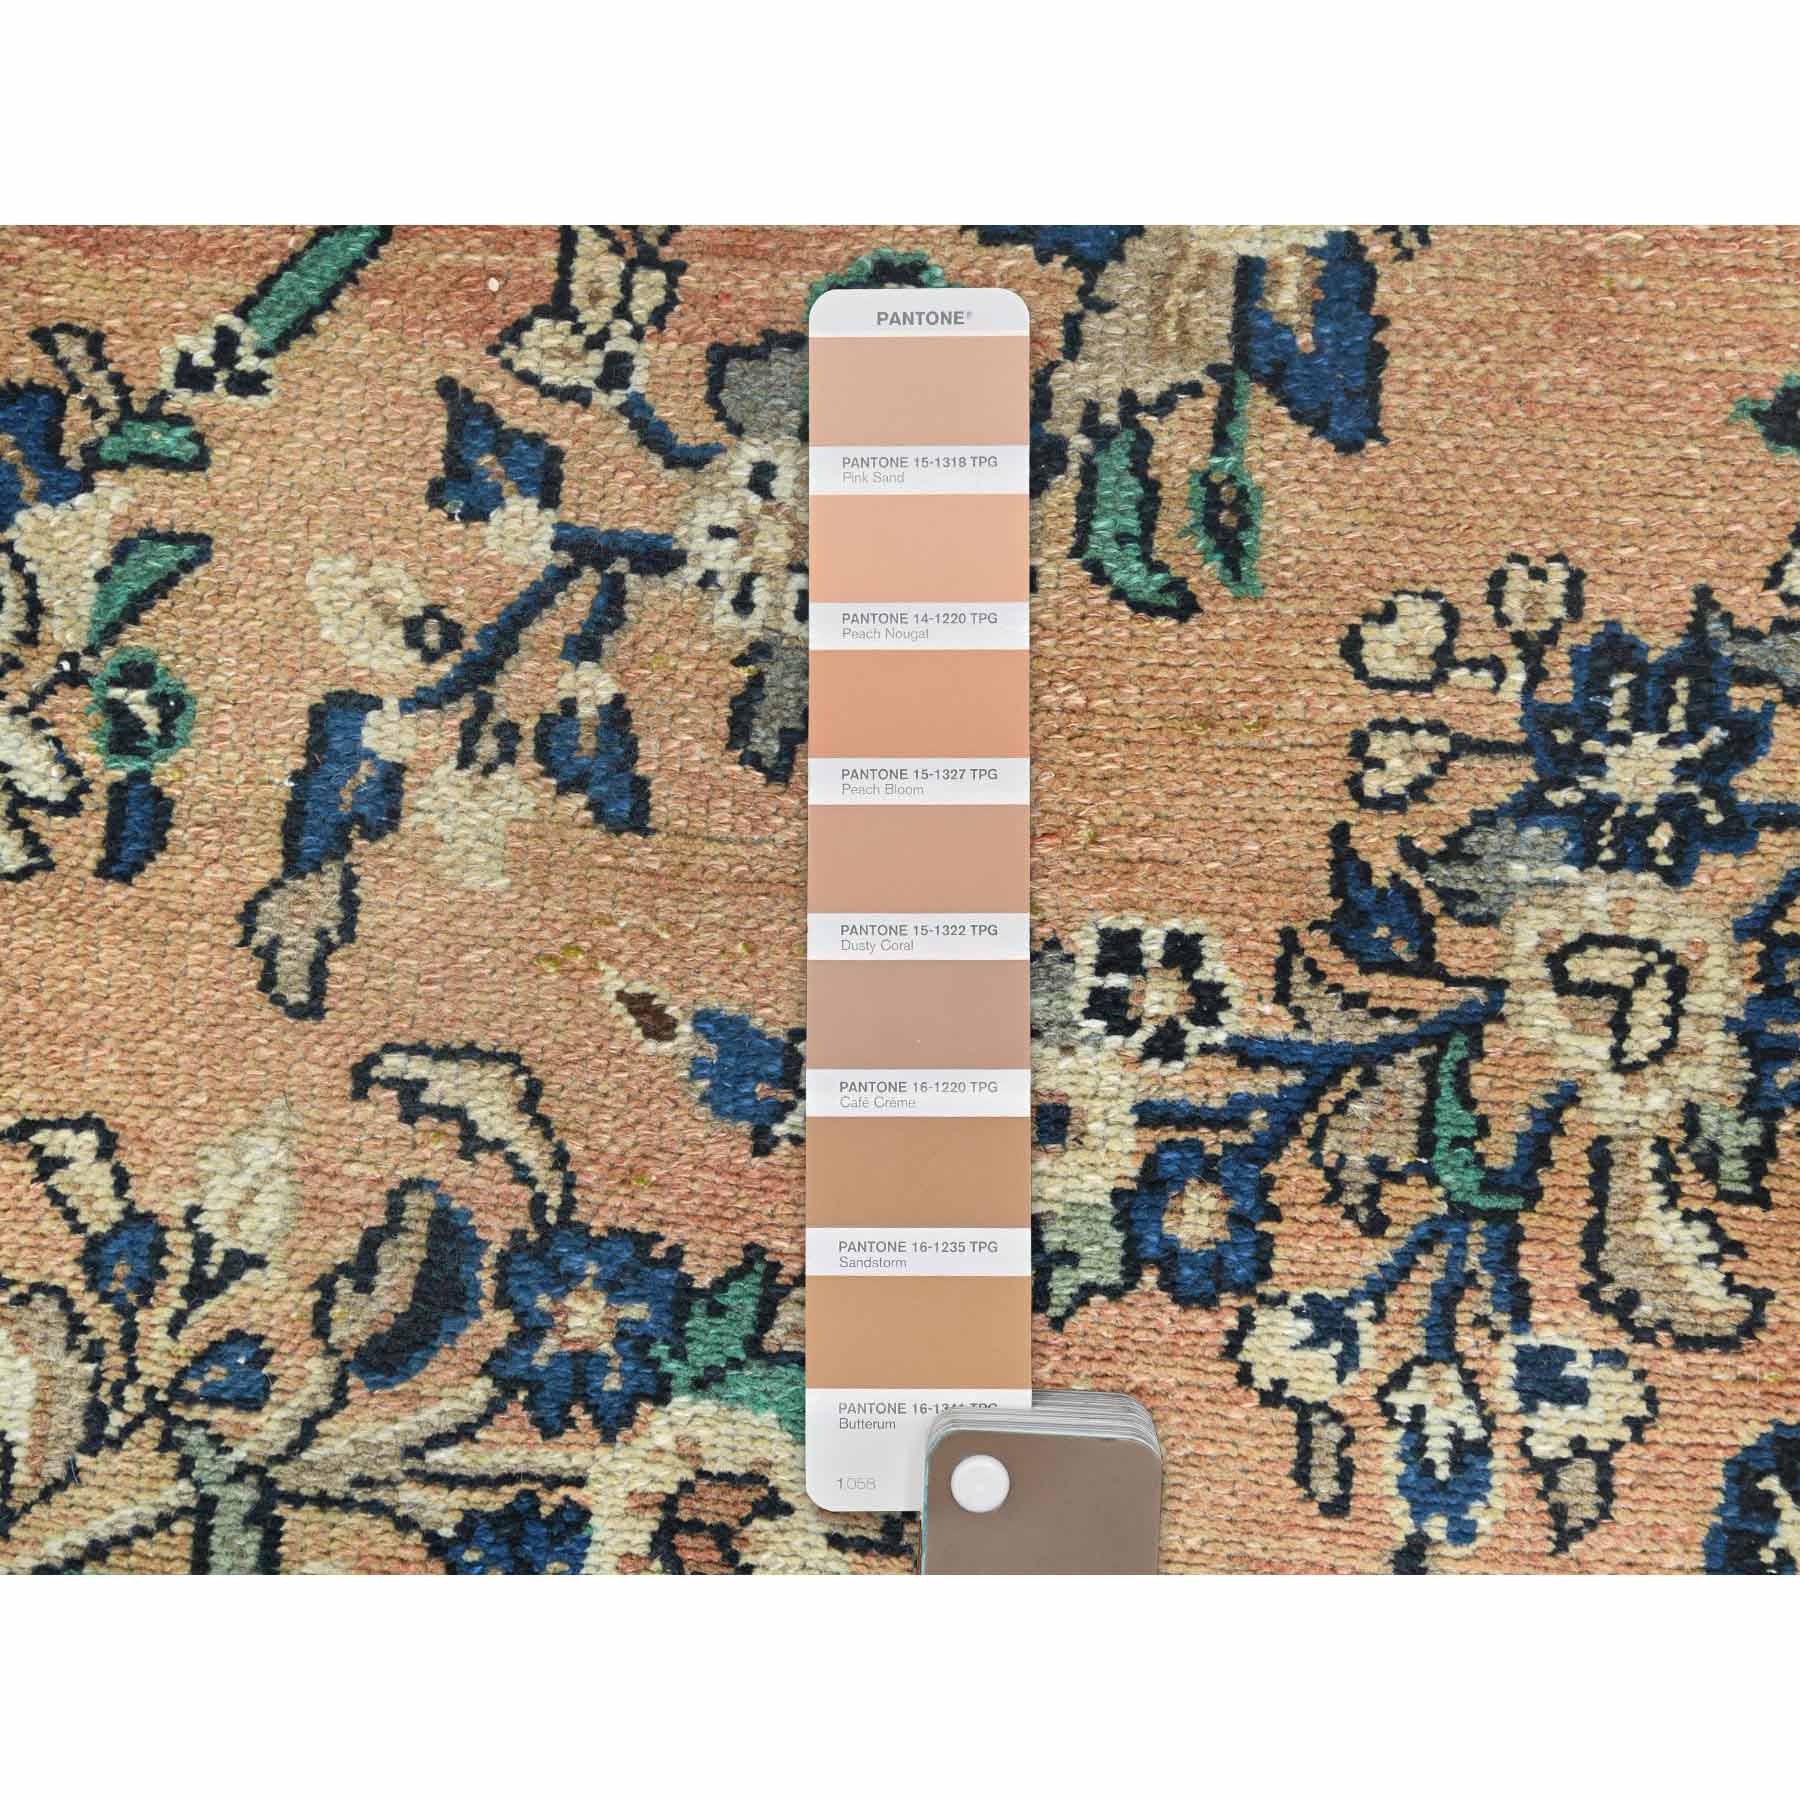 Overdyed-Vintage-Hand-Knotted-Rug-405870